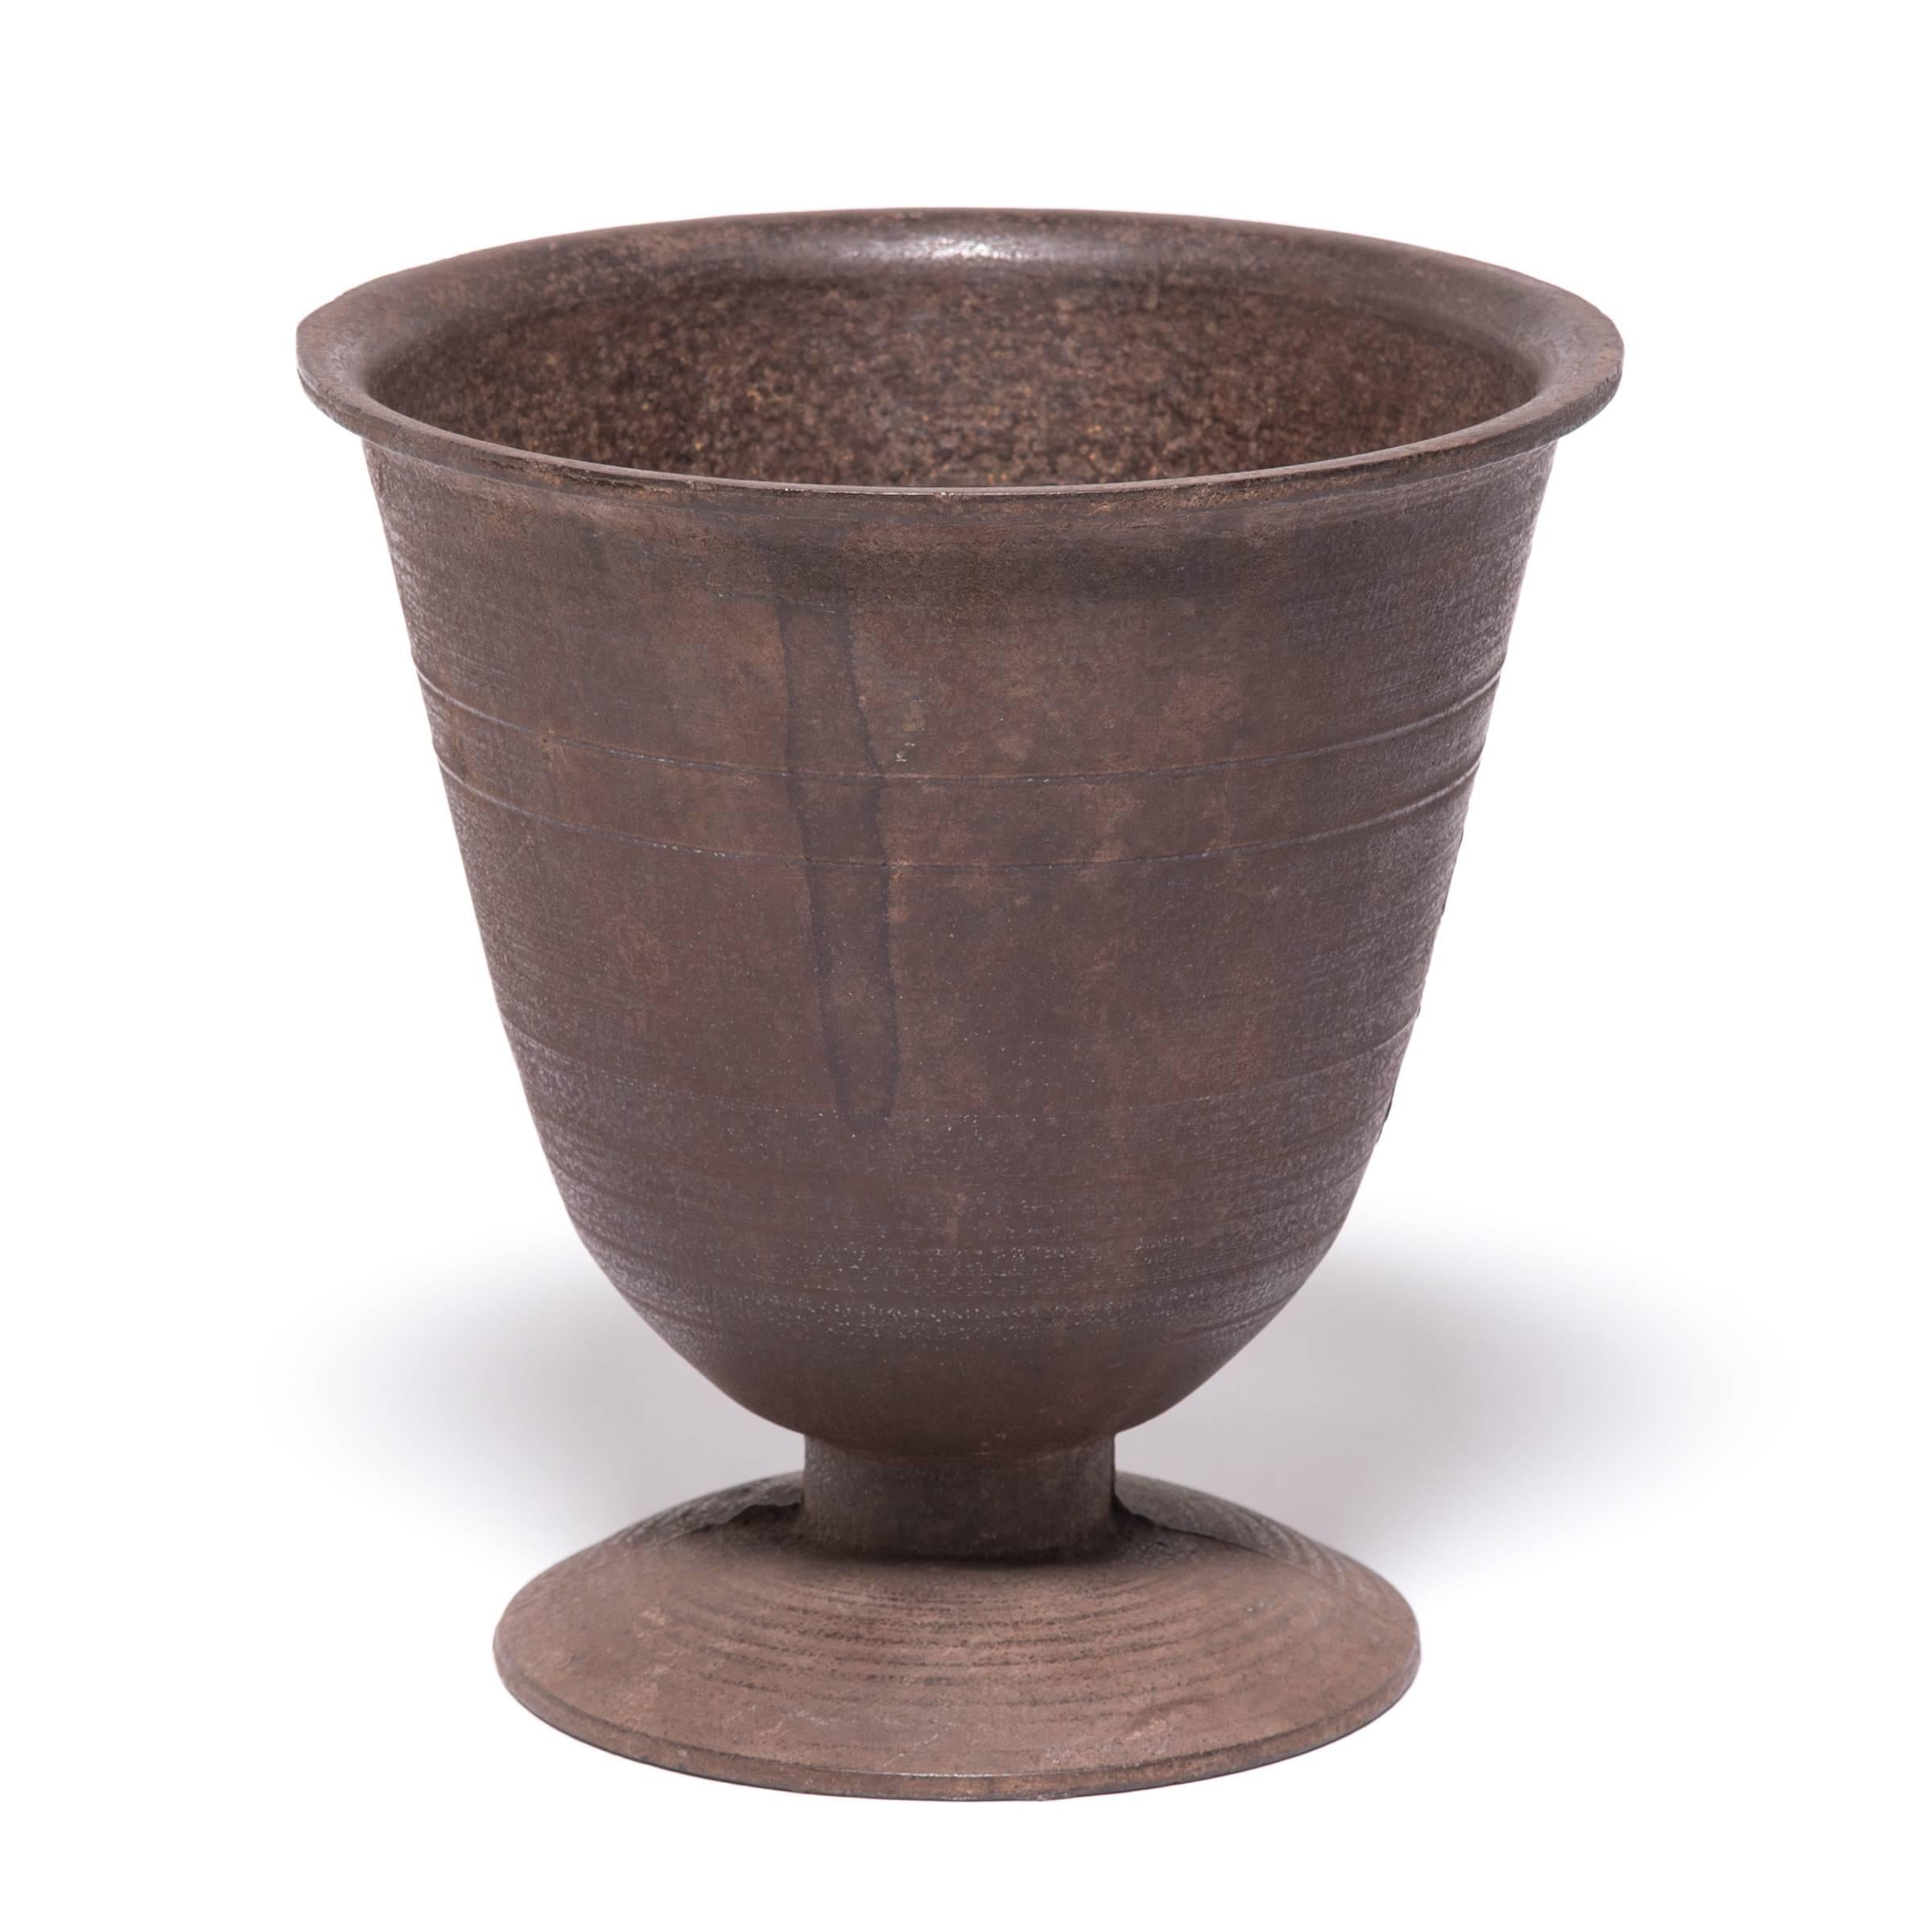 Since ancient times, apothecaries around the world have been using mortar and pestles like this one to grind medicinal herbs. This finely crafted and sculptural vessel was cast in iron in the early 1900s and would have been indispensable to a Korean